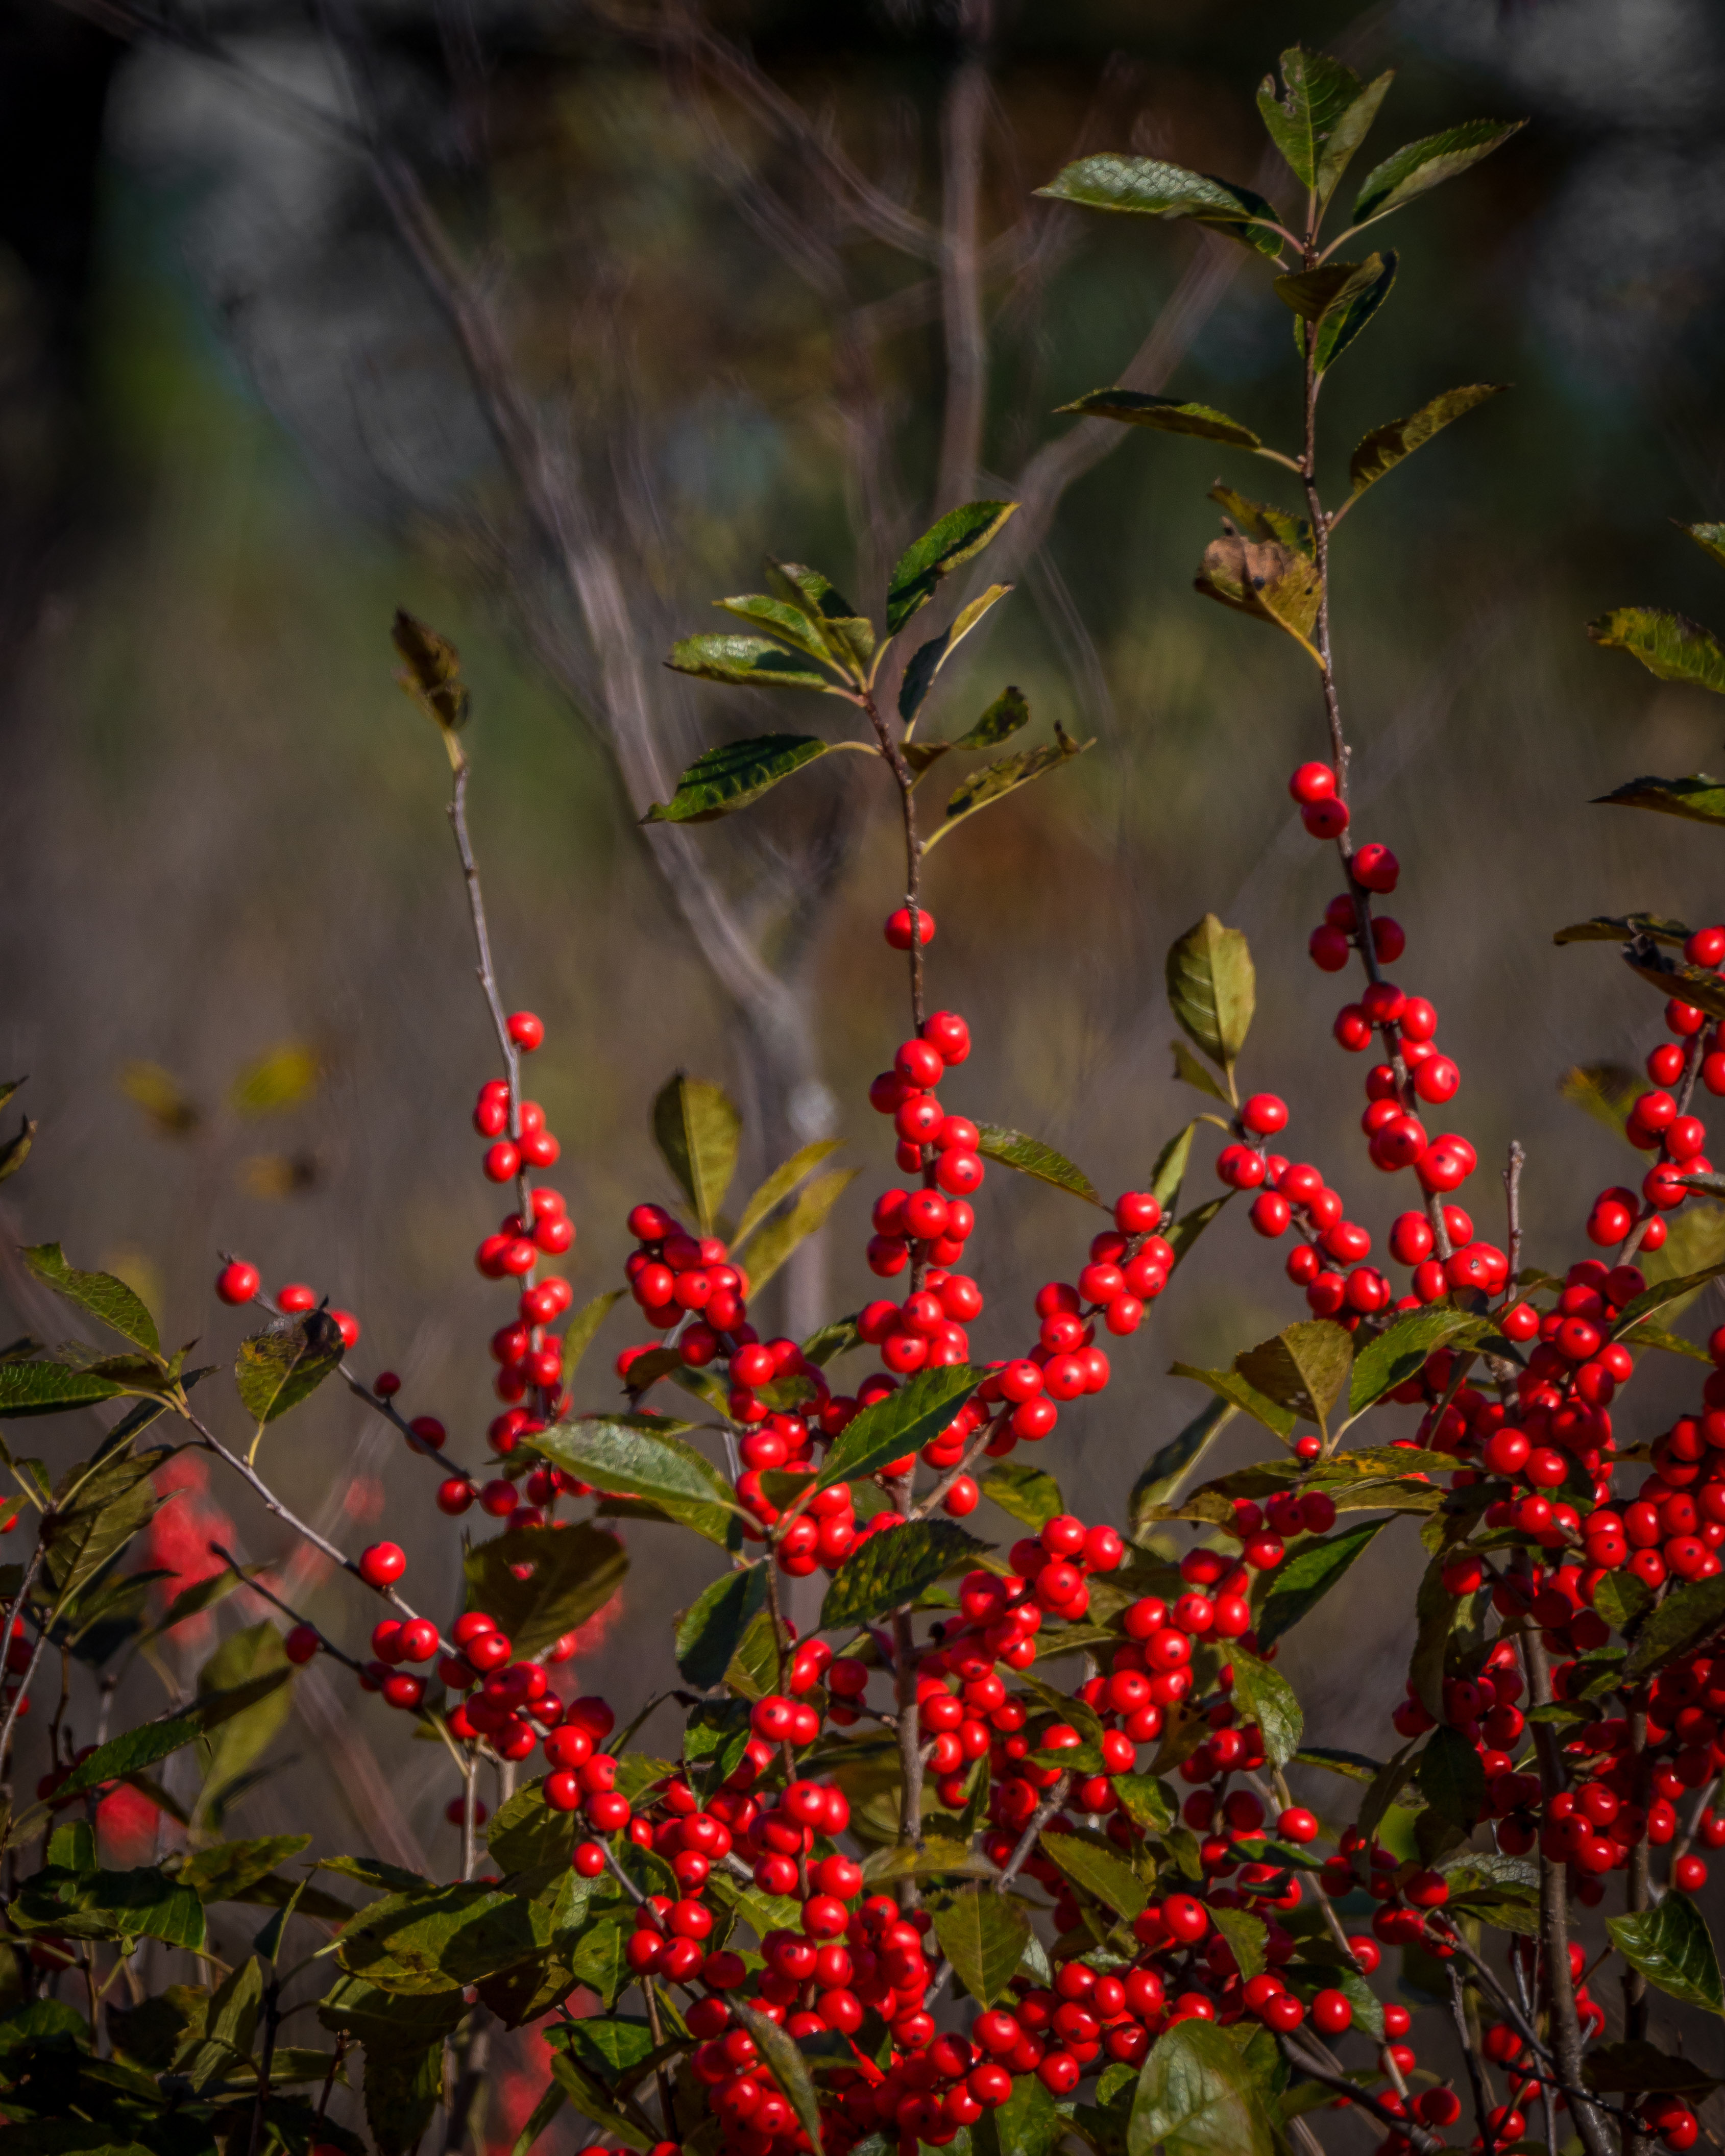 20171016 Fall Colours, Winterberries | Brtthome's Blog